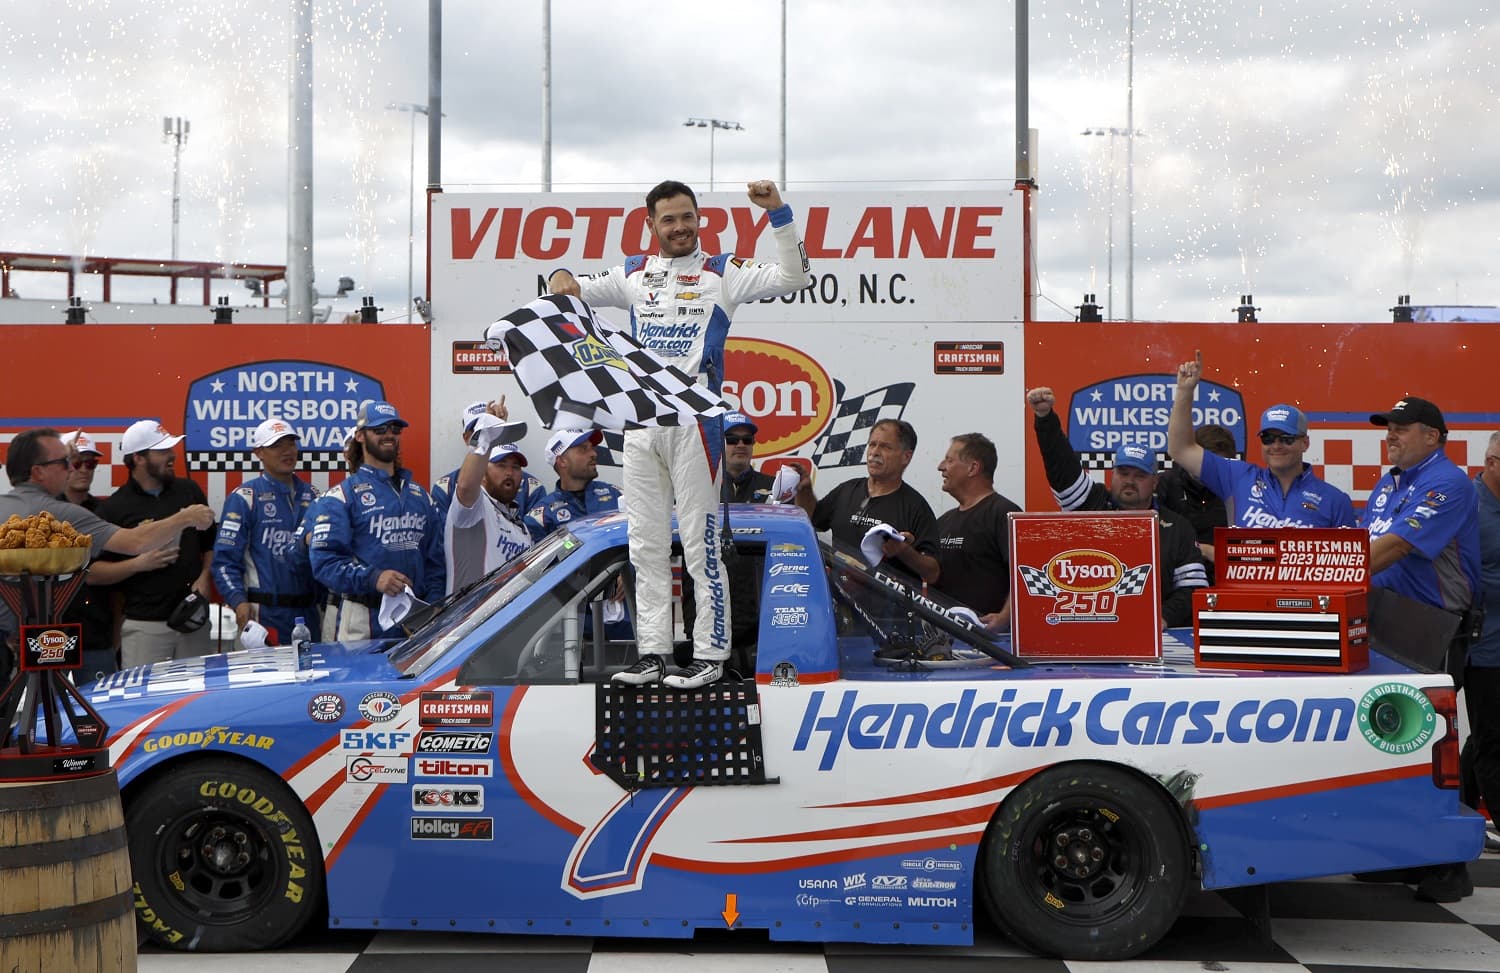 Kyle Larson celebrates after winning the NASCAR Craftsman Truck Series Tyson 250 at North Wilkesboro Speedway on May 20, 2023. | Chris Graythen/Getty Images